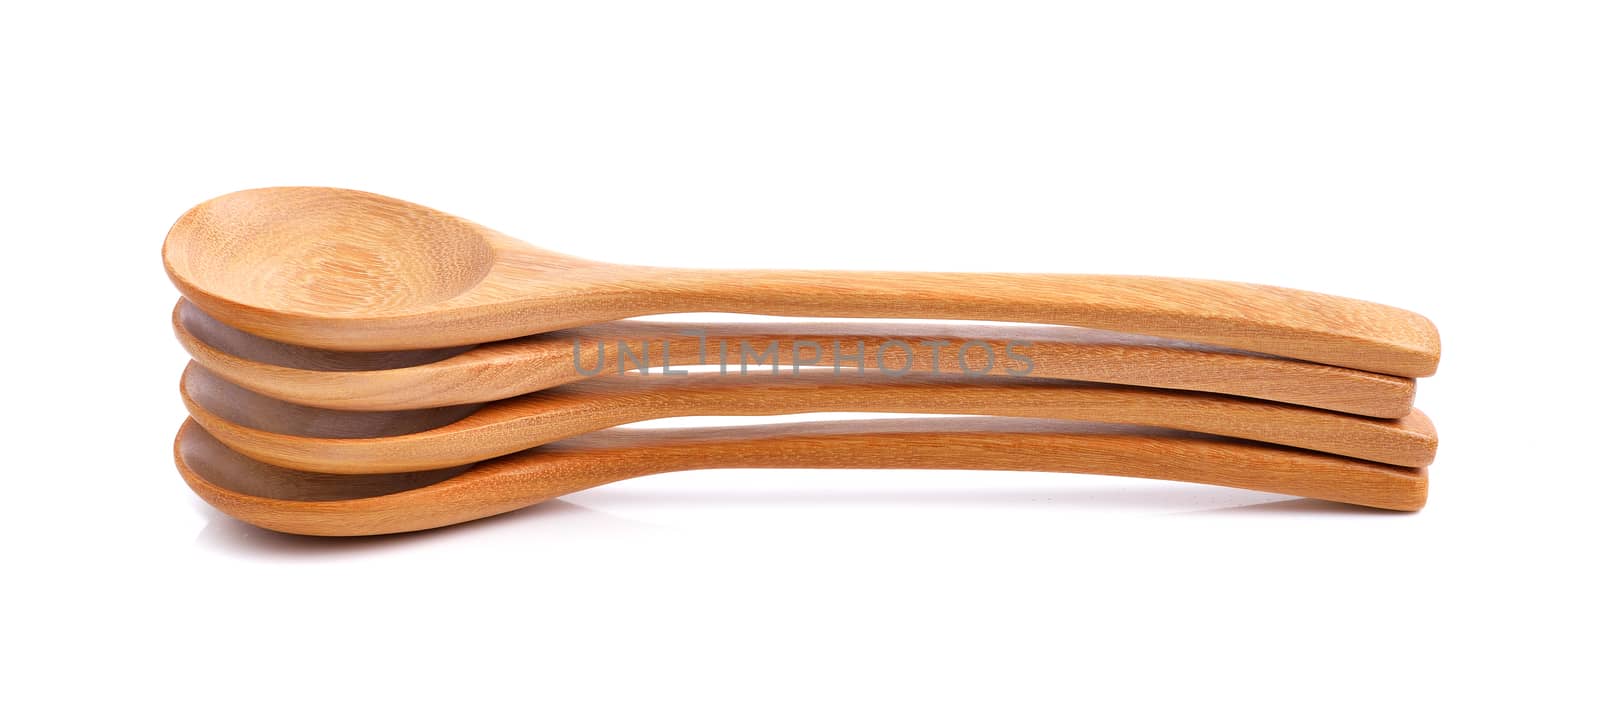 wood spoon on white background by sommai